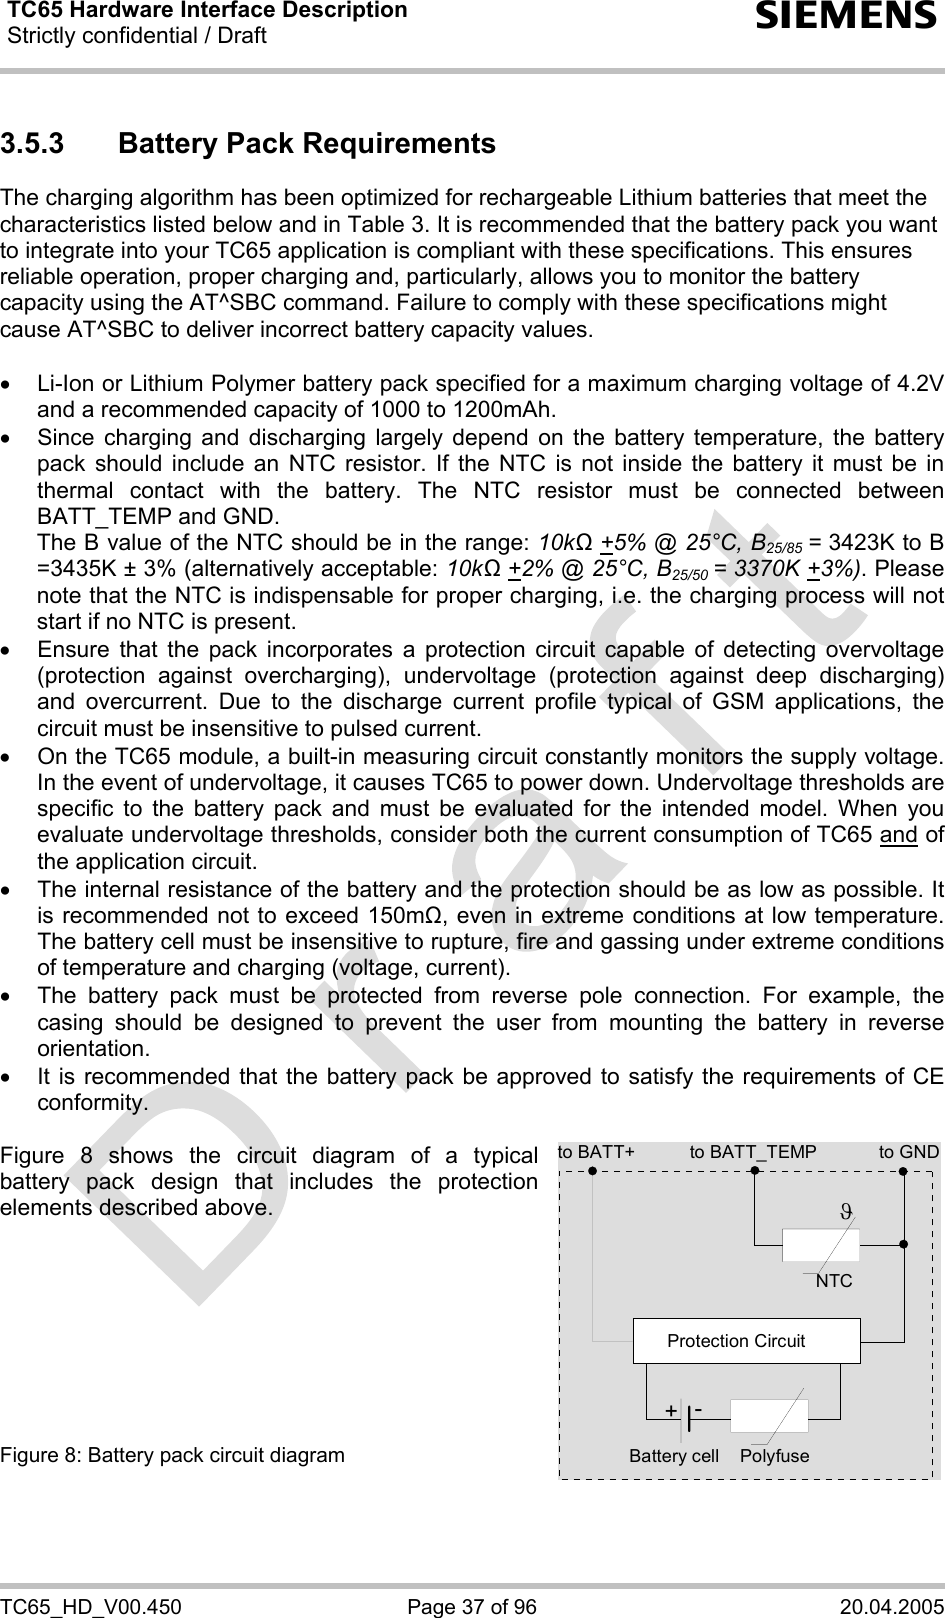 TC65 Hardware Interface Description Strictly confidential / Draft  s TC65_HD_V00.450  Page 37 of 96  20.04.2005 3.5.3  Battery Pack Requirements The charging algorithm has been optimized for rechargeable Lithium batteries that meet the characteristics listed below and in Table 3. It is recommended that the battery pack you want to integrate into your TC65 application is compliant with these specifications. This ensures reliable operation, proper charging and, particularly, allows you to monitor the battery capacity using the AT^SBC command. Failure to comply with these specifications might cause AT^SBC to deliver incorrect battery capacity values.   •  Li-Ion or Lithium Polymer battery pack specified for a maximum charging voltage of 4.2V and a recommended capacity of 1000 to 1200mAh.  •  Since charging and discharging largely depend on the battery temperature, the battery pack should include an NTC resistor. If the NTC is not inside the battery it must be in thermal contact with the battery. The NTC resistor must be connected between BATT_TEMP and GND.  The B value of the NTC should be in the range: 10kΩ +5% @ 25°C, B25/85 = 3423K to B =3435K ± 3% (alternatively acceptable: 10kΩ +2% @ 25°C, B25/50 = 3370K +3%). Please note that the NTC is indispensable for proper charging, i.e. the charging process will not start if no NTC is present. •  Ensure that the pack incorporates a protection circuit capable of detecting overvoltage (protection against overcharging), undervoltage (protection against deep discharging) and overcurrent. Due to the discharge current profile typical of GSM applications, the circuit must be insensitive to pulsed current. •  On the TC65 module, a built-in measuring circuit constantly monitors the supply voltage. In the event of undervoltage, it causes TC65 to power down. Undervoltage thresholds are specific to the battery pack and must be evaluated for the intended model. When you evaluate undervoltage thresholds, consider both the current consumption of TC65 and of the application circuit.  •  The internal resistance of the battery and the protection should be as low as possible. It is recommended not to exceed 150m, even in extreme conditions at low temperature. The battery cell must be insensitive to rupture, fire and gassing under extreme conditions of temperature and charging (voltage, current). •  The battery pack must be protected from reverse pole connection. For example, the casing should be designed to prevent the user from mounting the battery in reverse orientation. •  It is recommended that the battery pack be approved to satisfy the requirements of CE conformity.  Figure 8 shows the circuit diagram of a typical battery pack design that includes the protection elements described above.          Figure 8: Battery pack circuit diagram  to BATT_TEMP to GNDNTCPolyfuseϑProtection Circuit+-Battery cellto BATT+